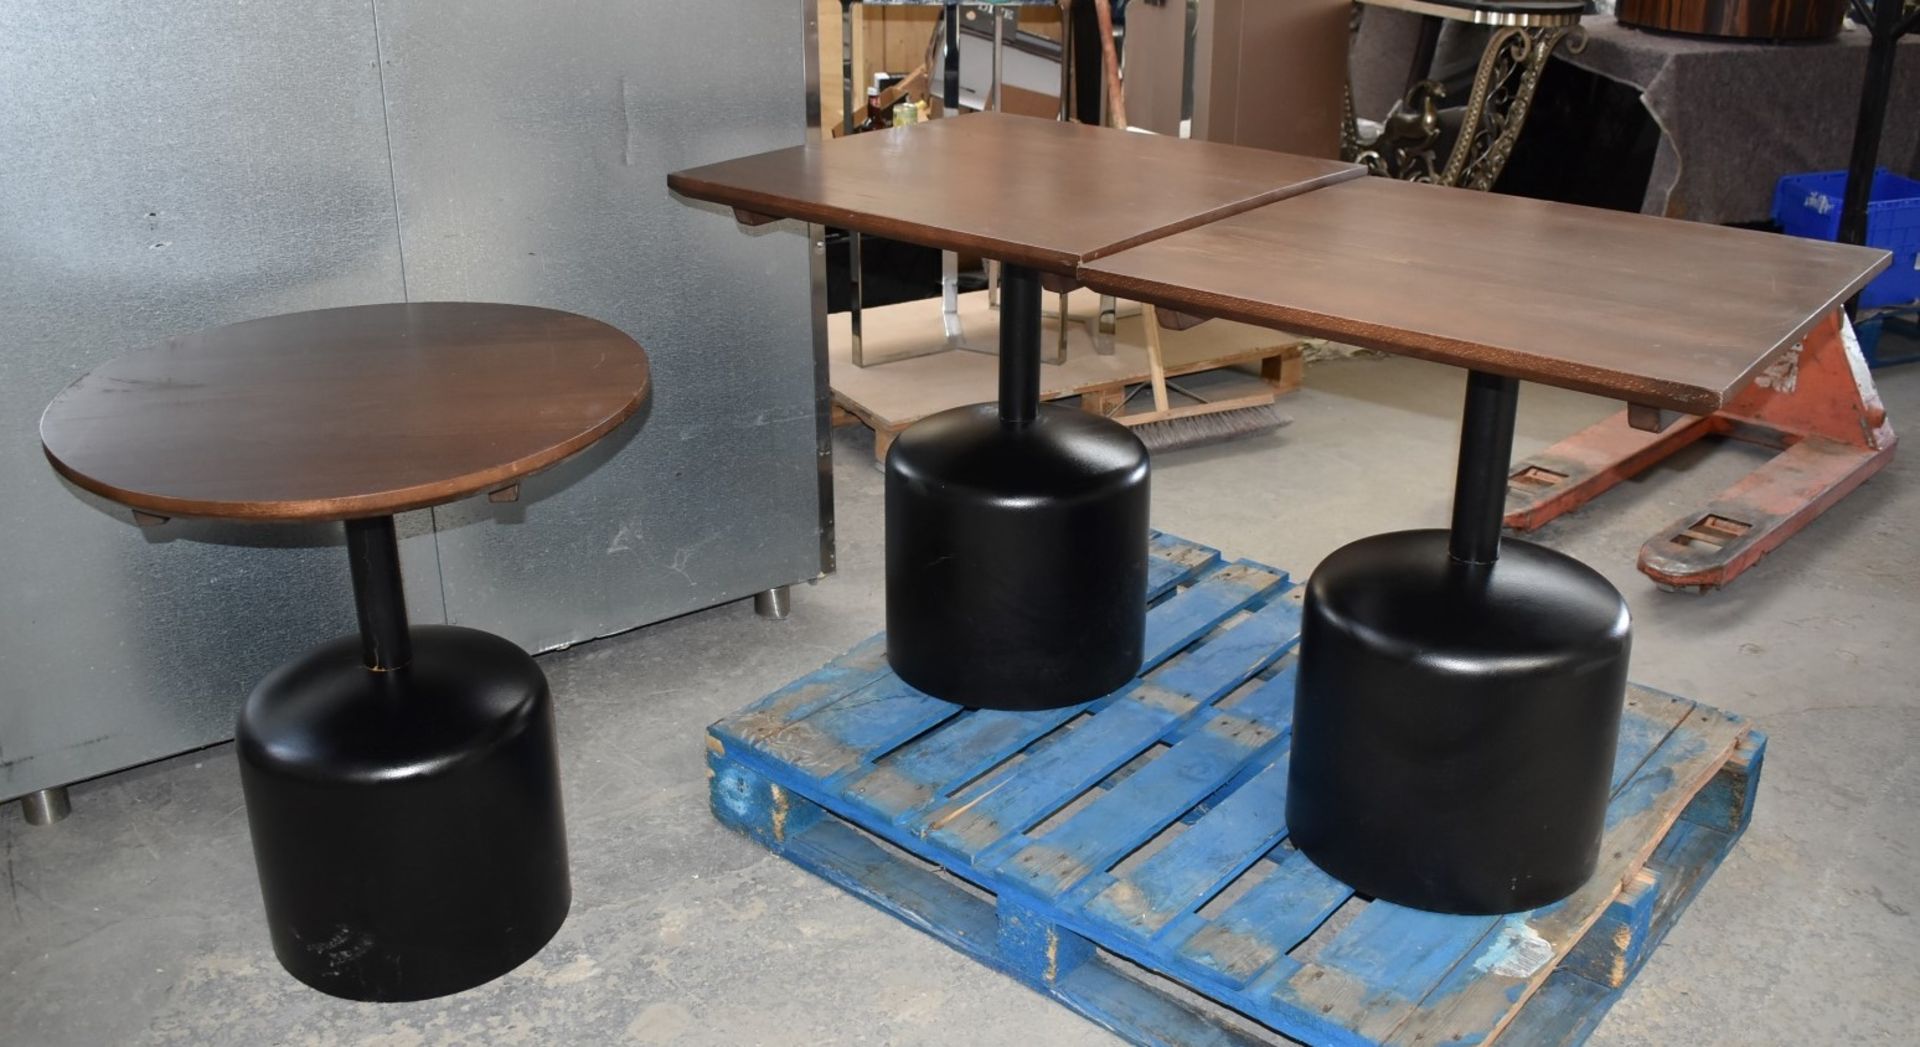 14 x Commercial Restaurant Tables Features Large Black Pedestals and Dark Stained Wooden Tops - Image 12 of 23